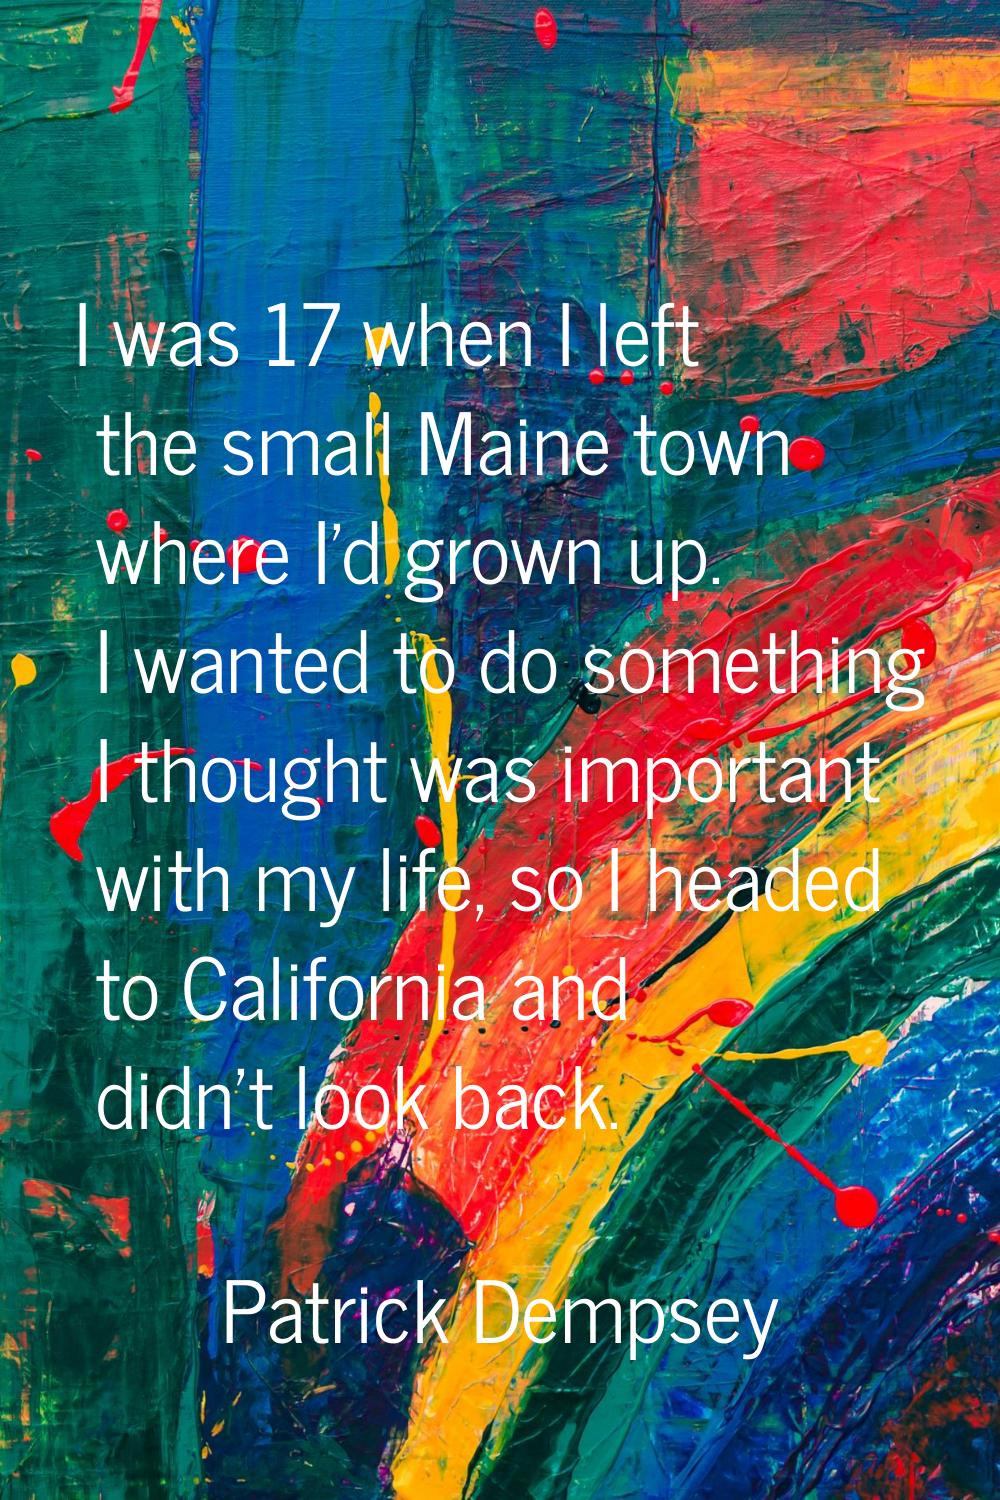 I was 17 when I left the small Maine town where I'd grown up. I wanted to do something I thought wa